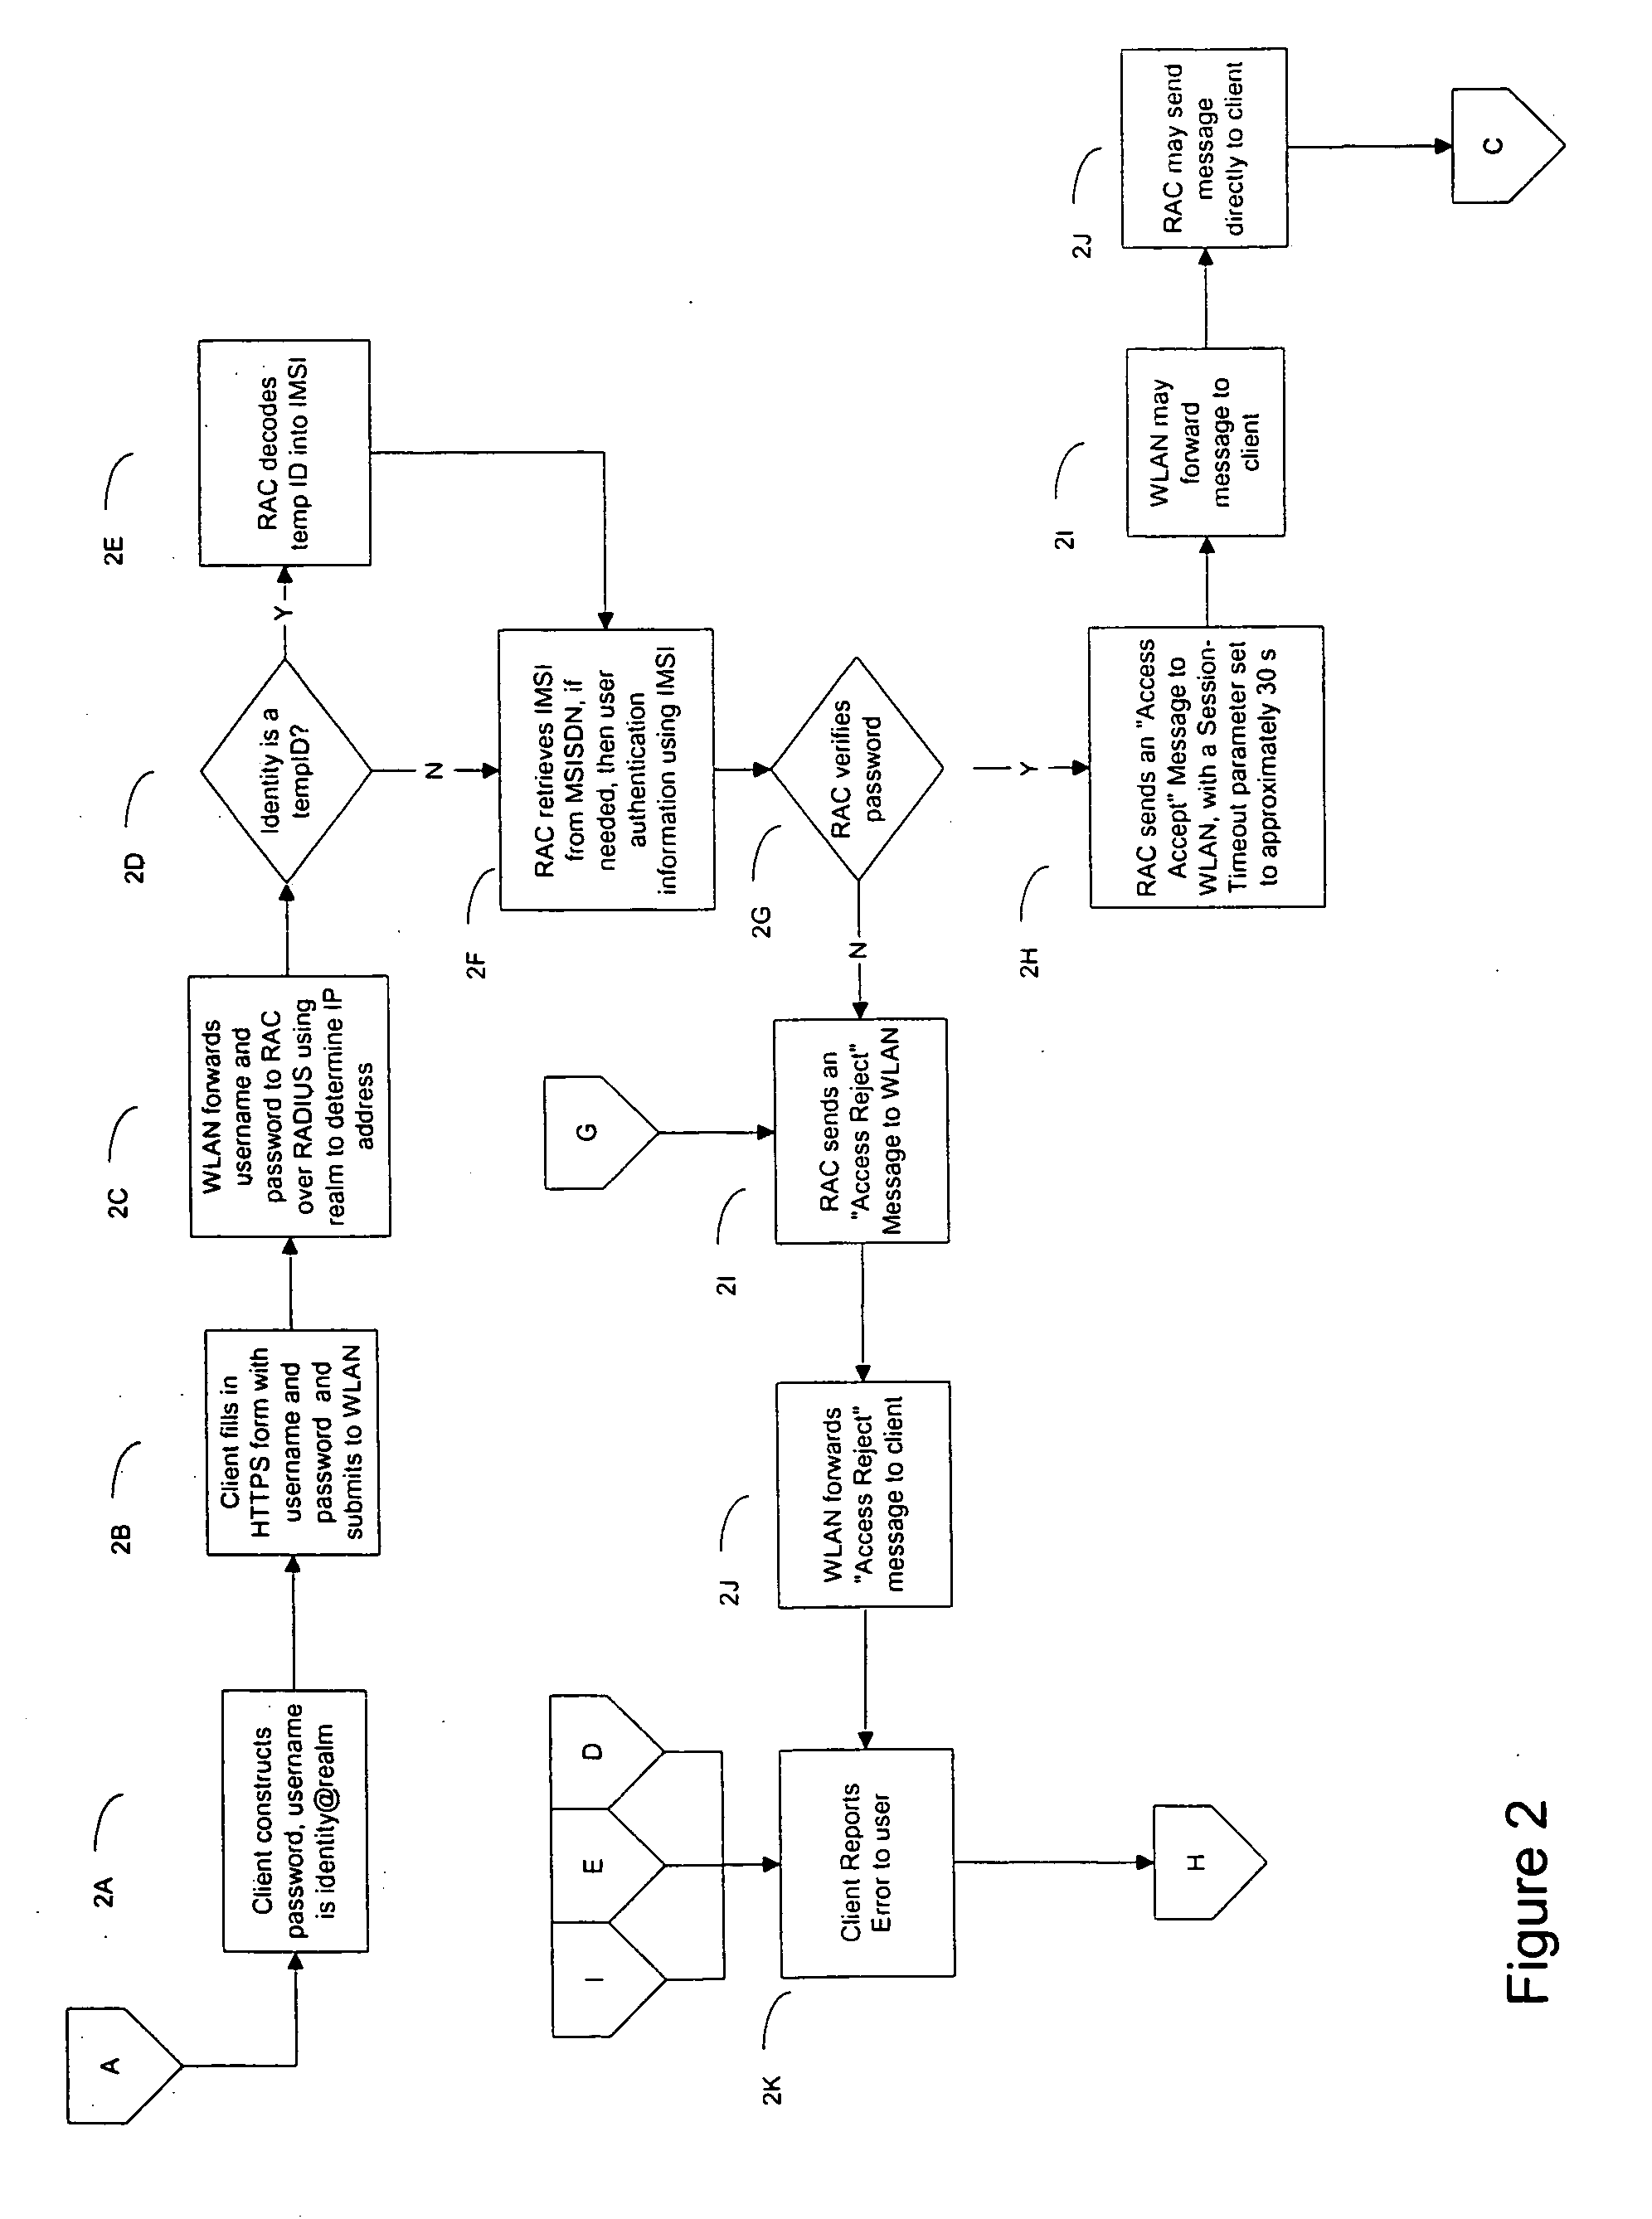 Method and system for providing SIM-based roaming over existing WLAN public access infrastructure